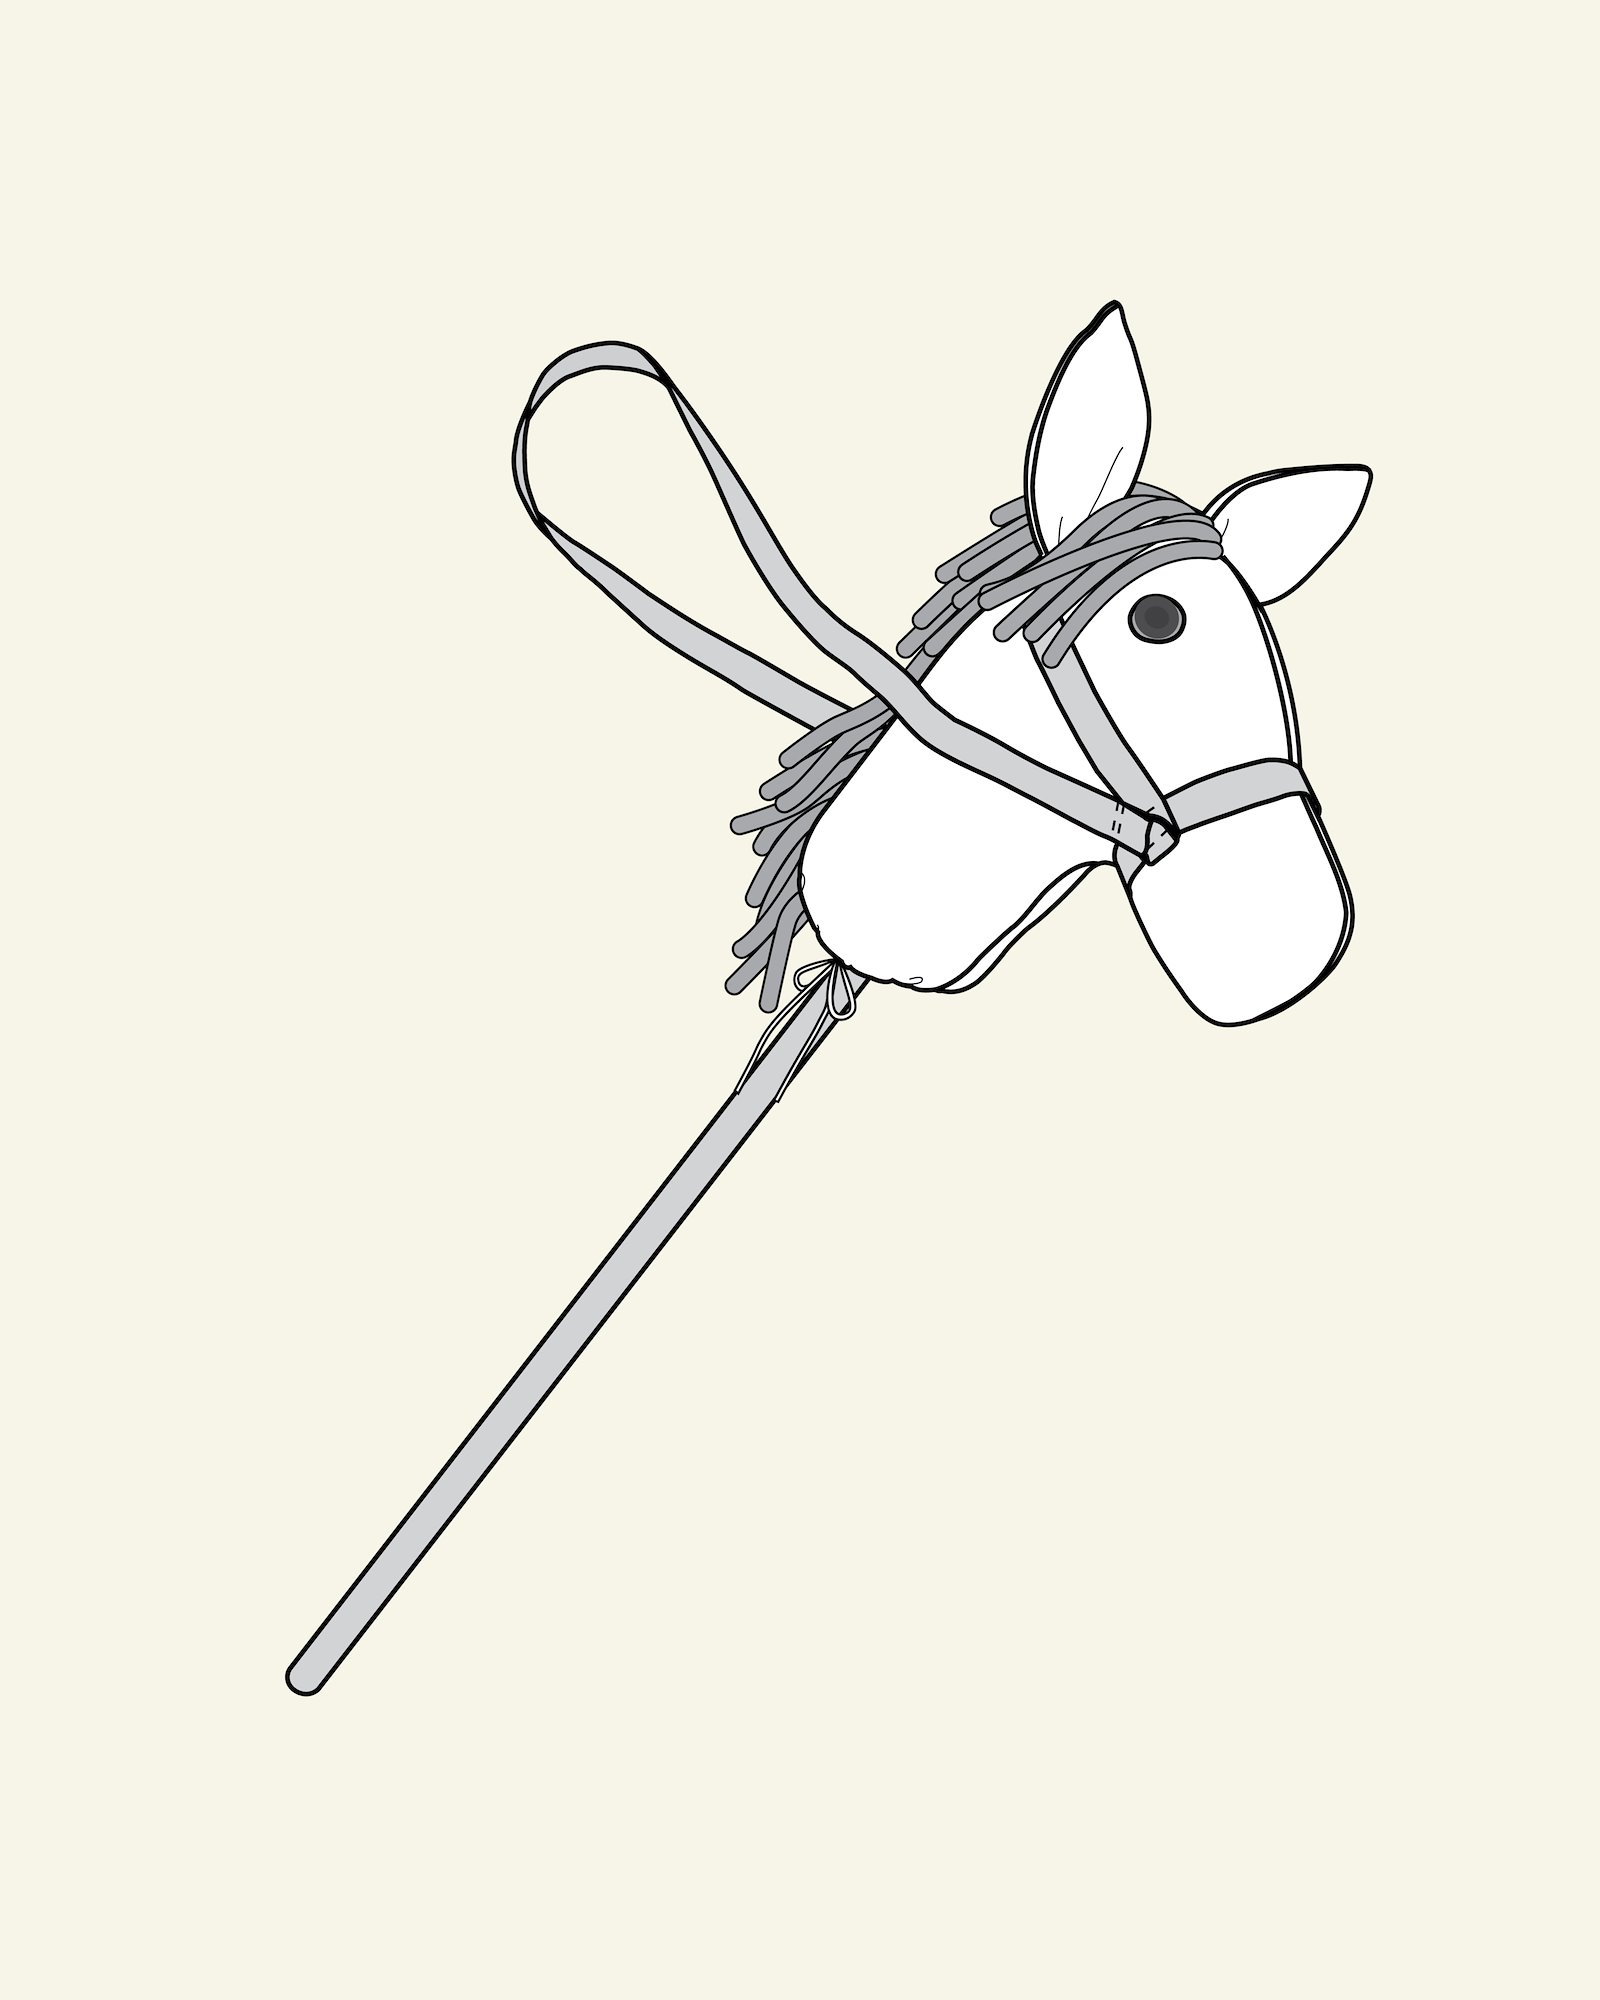 DIY this DIY: Sew a hobby horse project